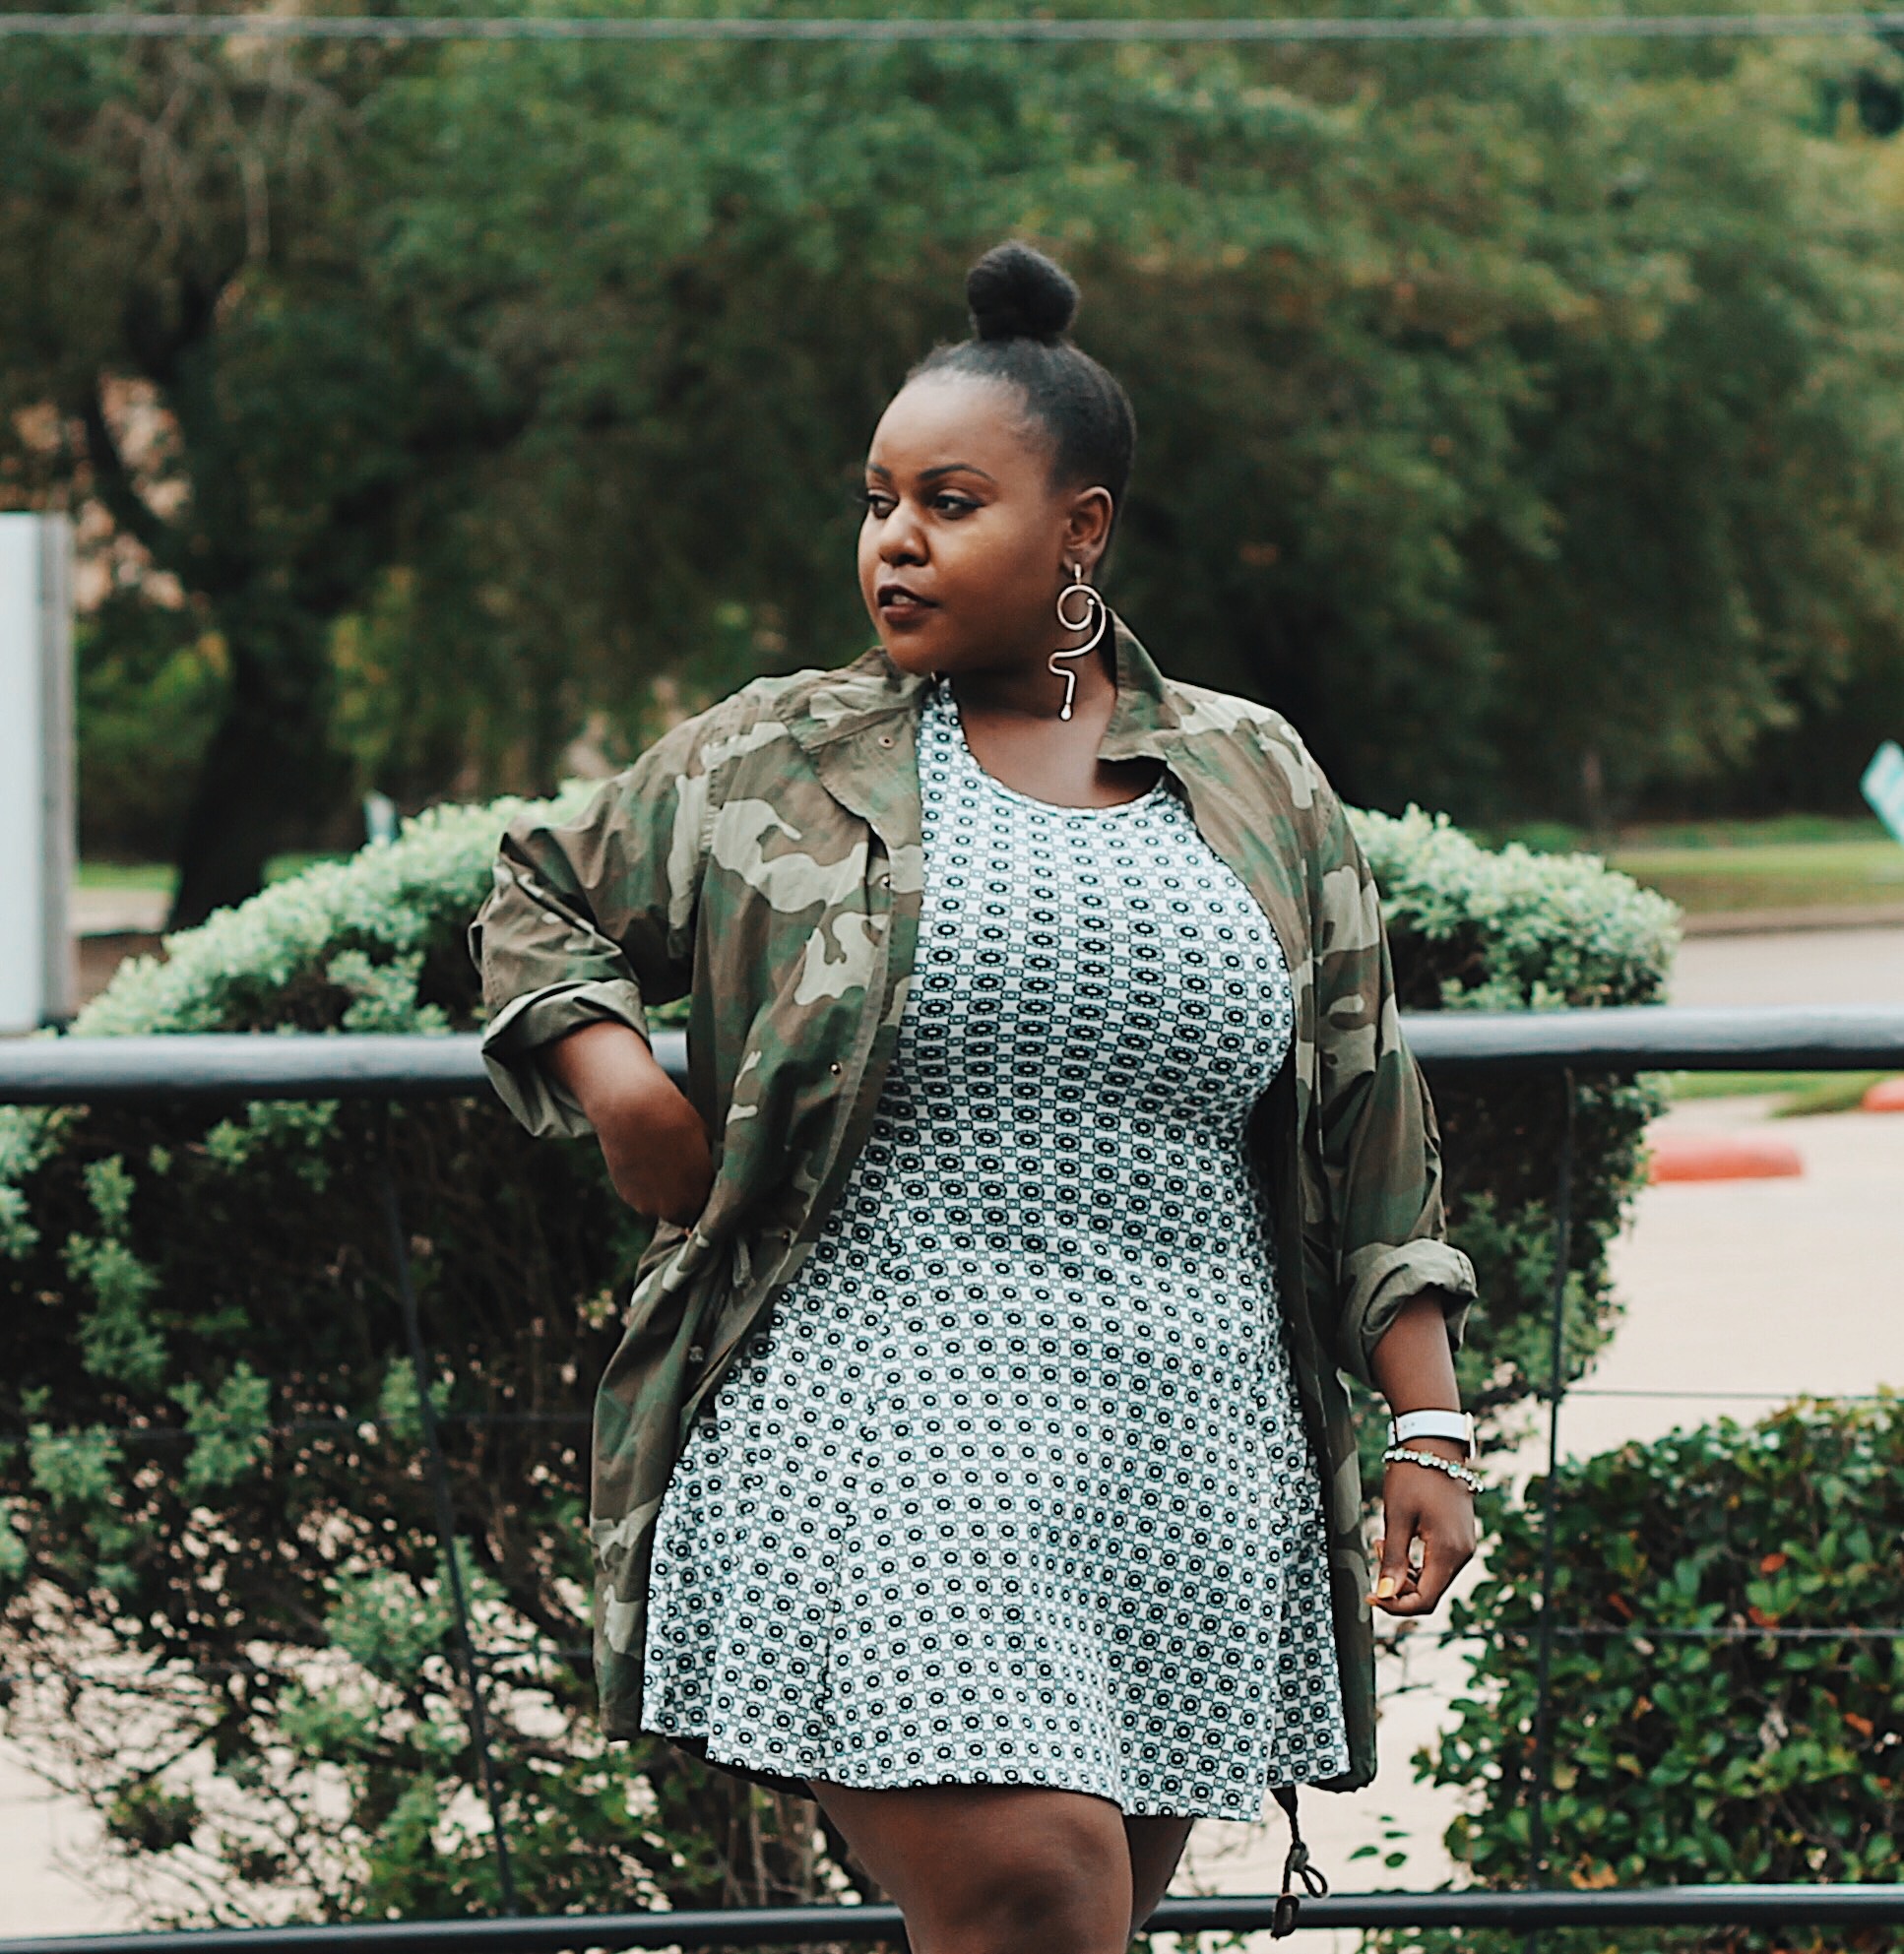 plus size fashion blogs 2017, beautiful curvy girls, how to fill the eye brow of a dark skin, beautiful plus size dark skin girls, plus size black bloggers, clothes for curvy girls, curvy girl fashion clothing, plus blog, plus size fashion tips, plus size women blog, curvy women fashion, plus blog, curvy girl fashion blog, style plus curves, plus size fashion instagram, curvy girl blog, bbw blog, plus size street fashion, plus size beauty blog, plus size fashion ideas, curvy girl summer outfits, plus size fashion magazine, plus fashion bloggers, boohoo, rebdolls bodycon maxi dresses, plus size camouflage jacket